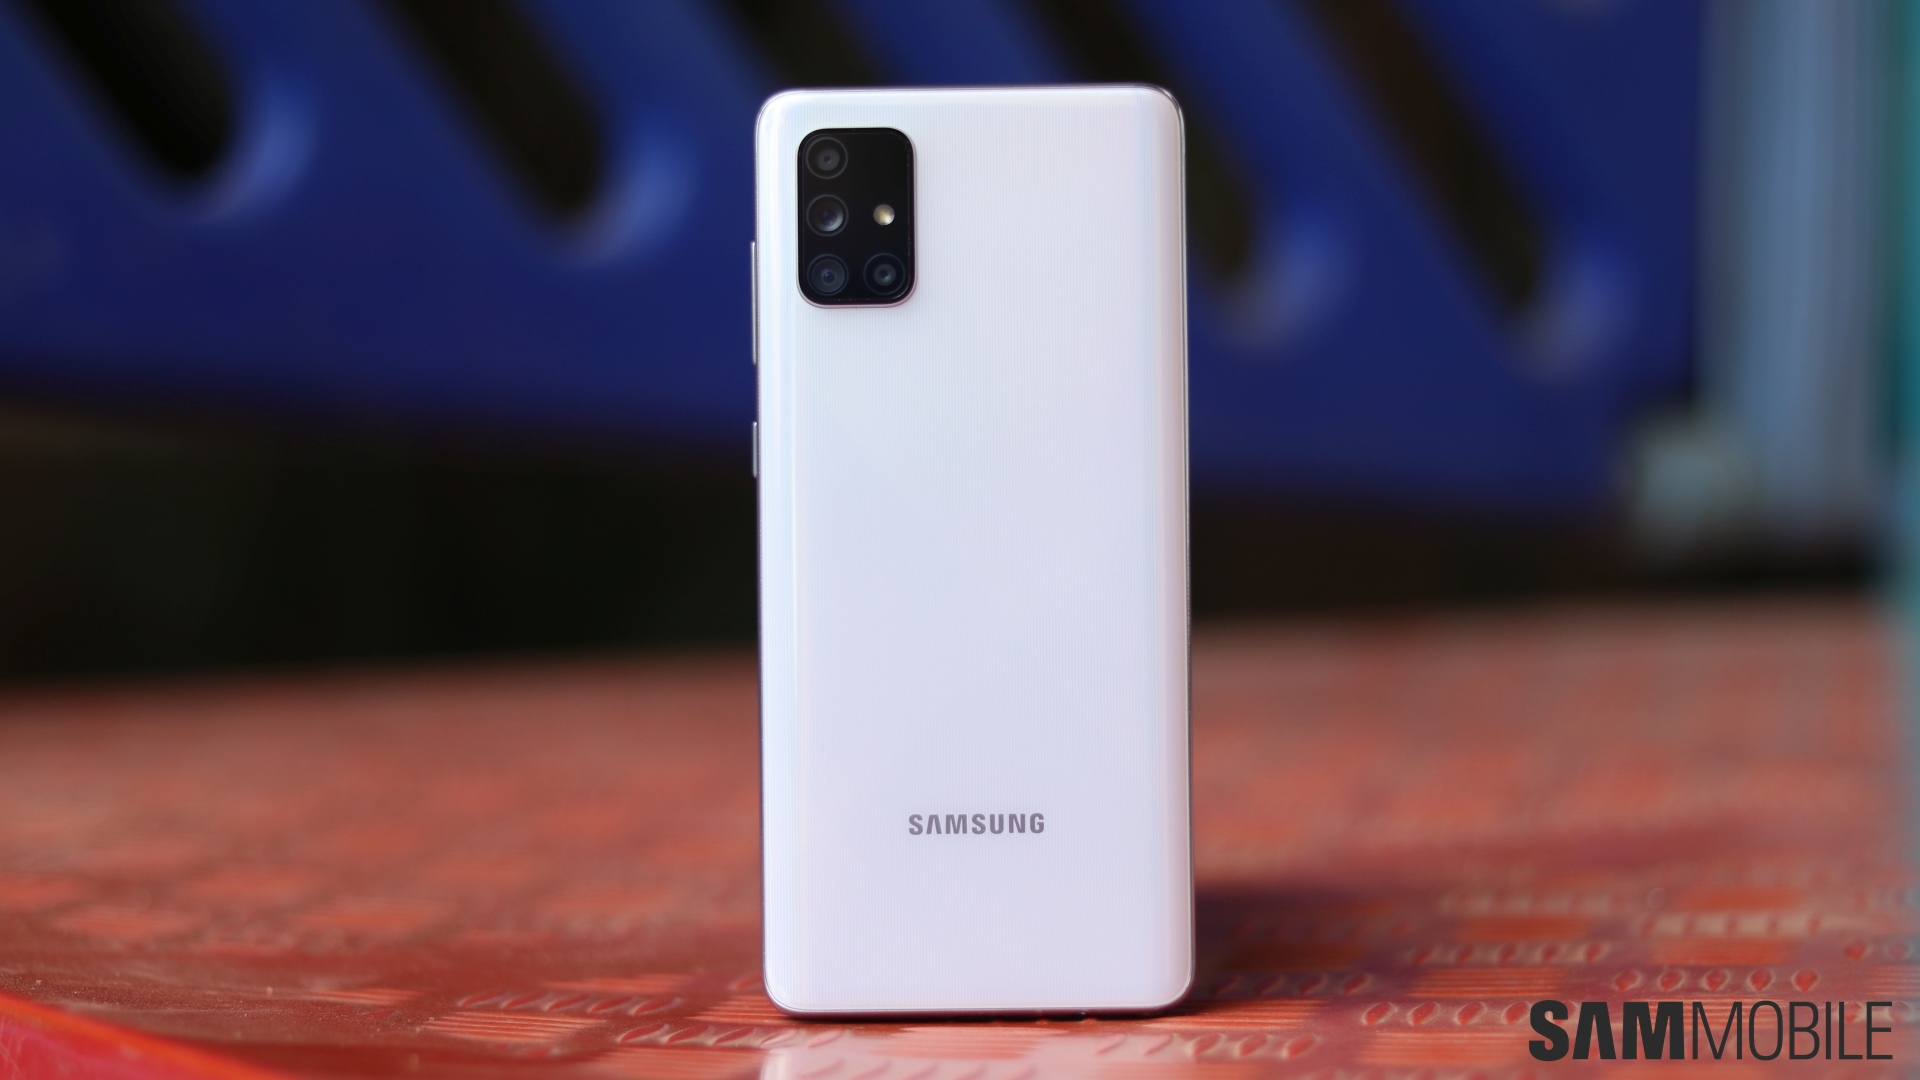 Samsung Galaxy A71 review: A beautiful all-rounder mid-range phone